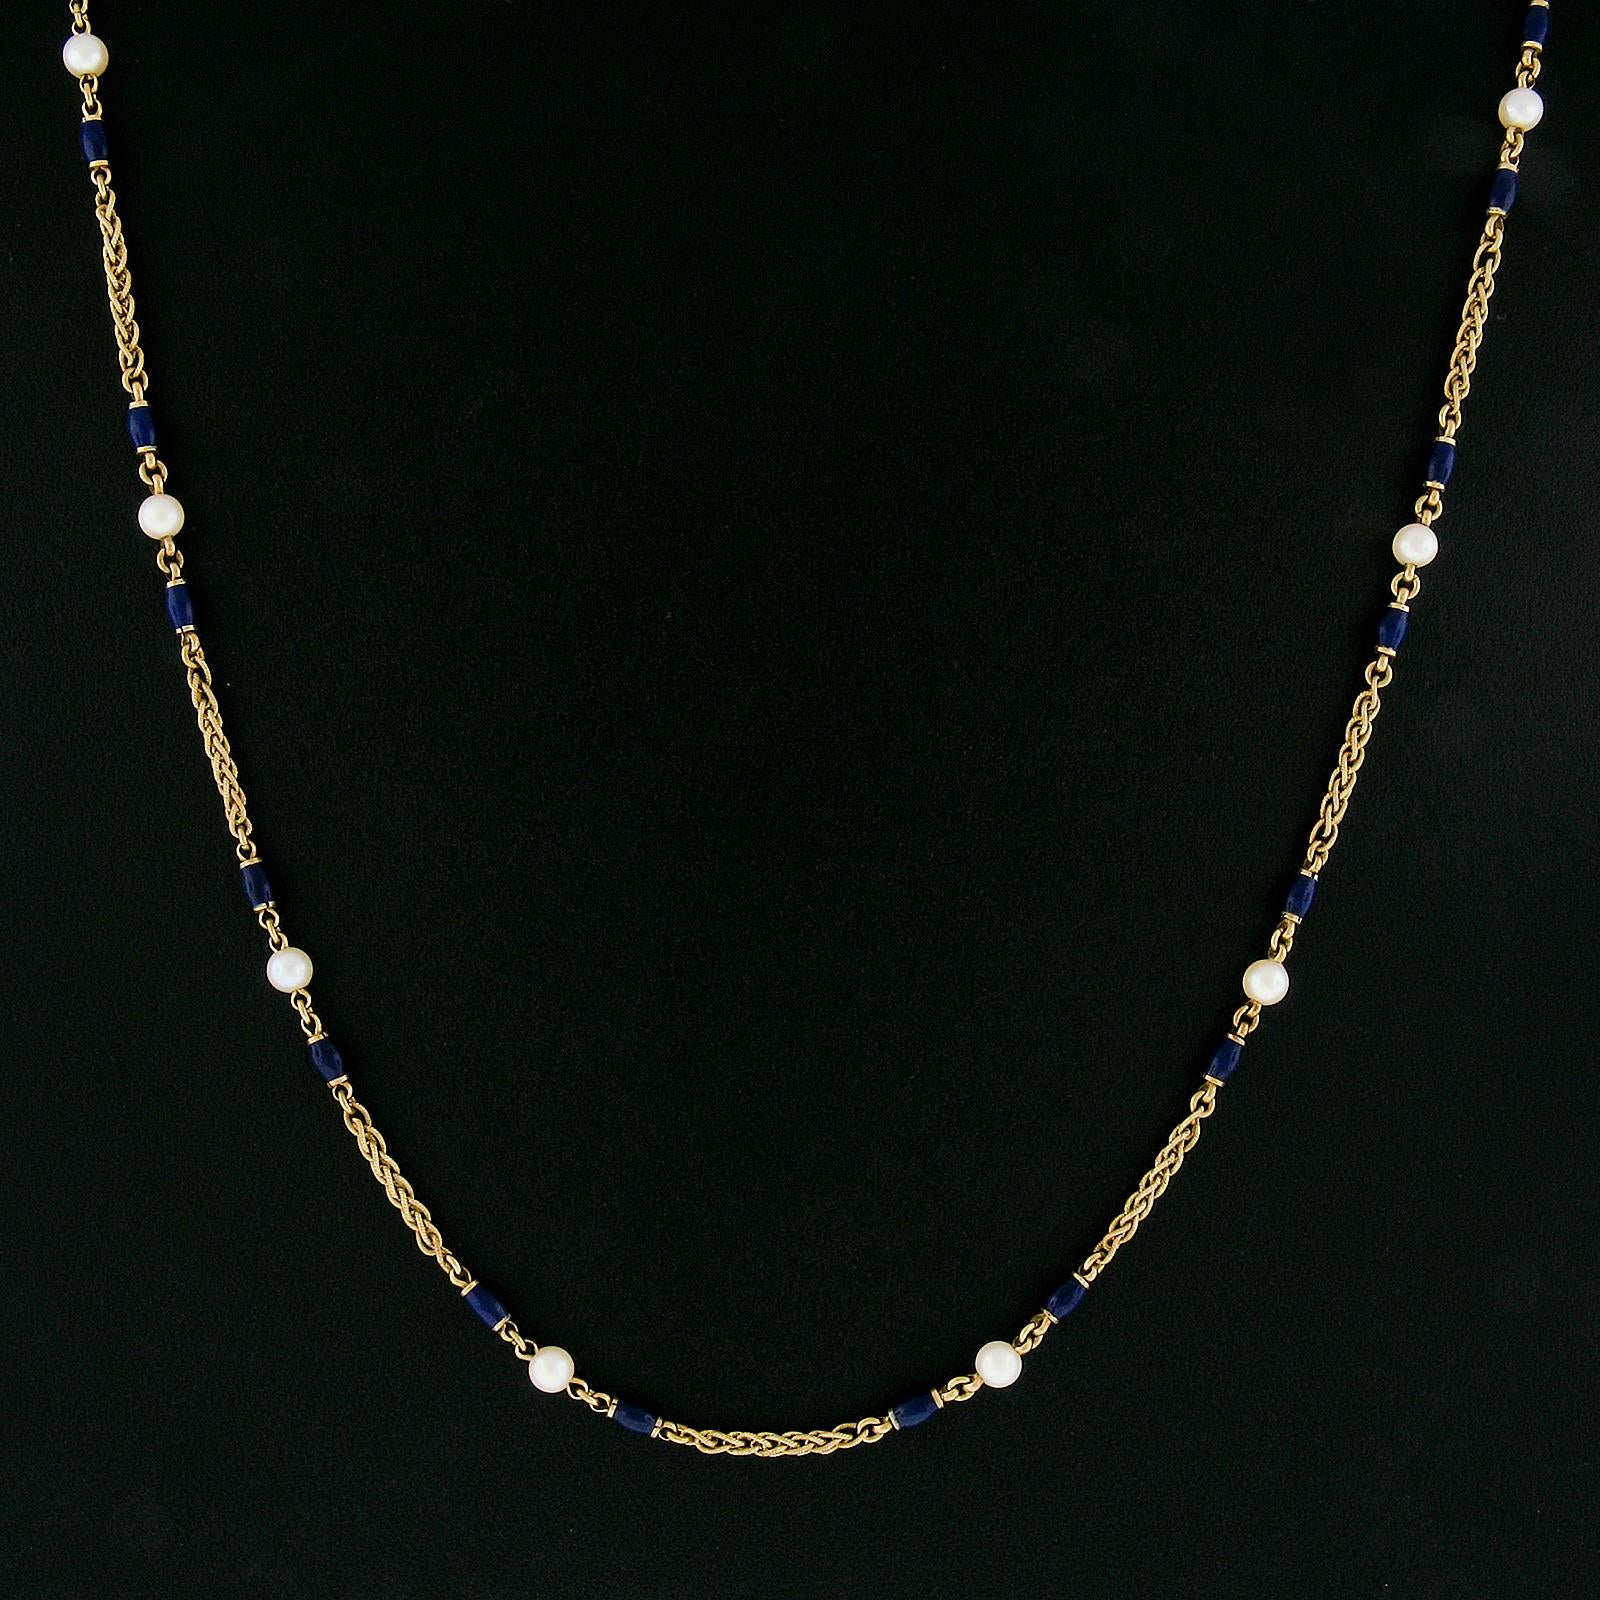 Vintage 18k Gold 4.8mm Pearl & Blue Enamel Bead on Textured Wheat Chain Necklace For Sale 1